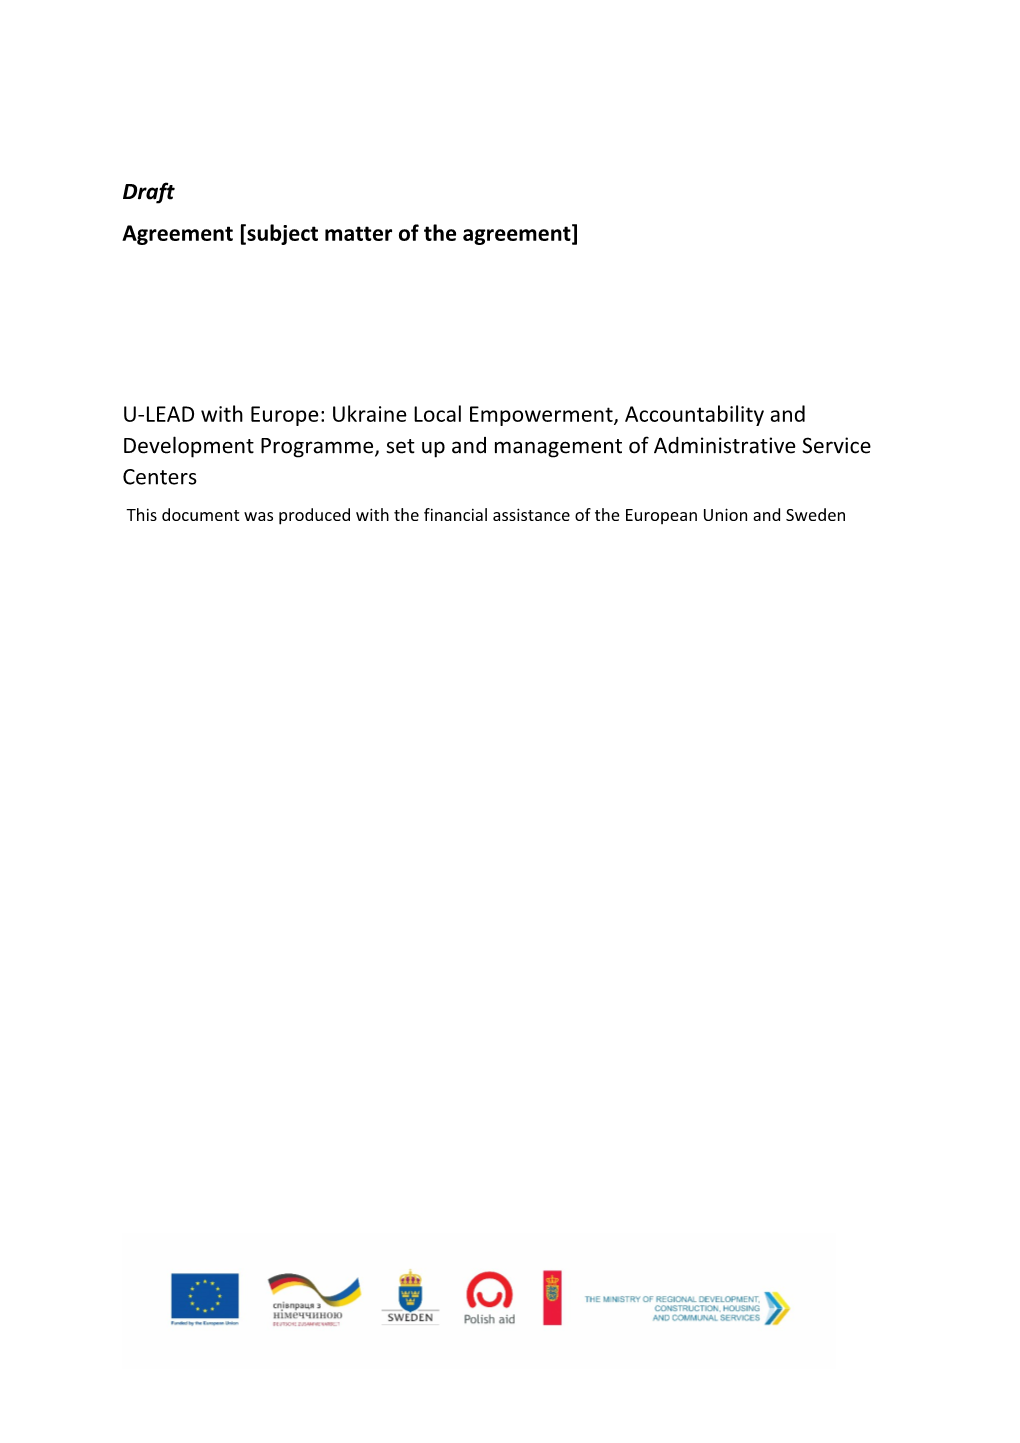 Agreement Subject Matter of the Agreement